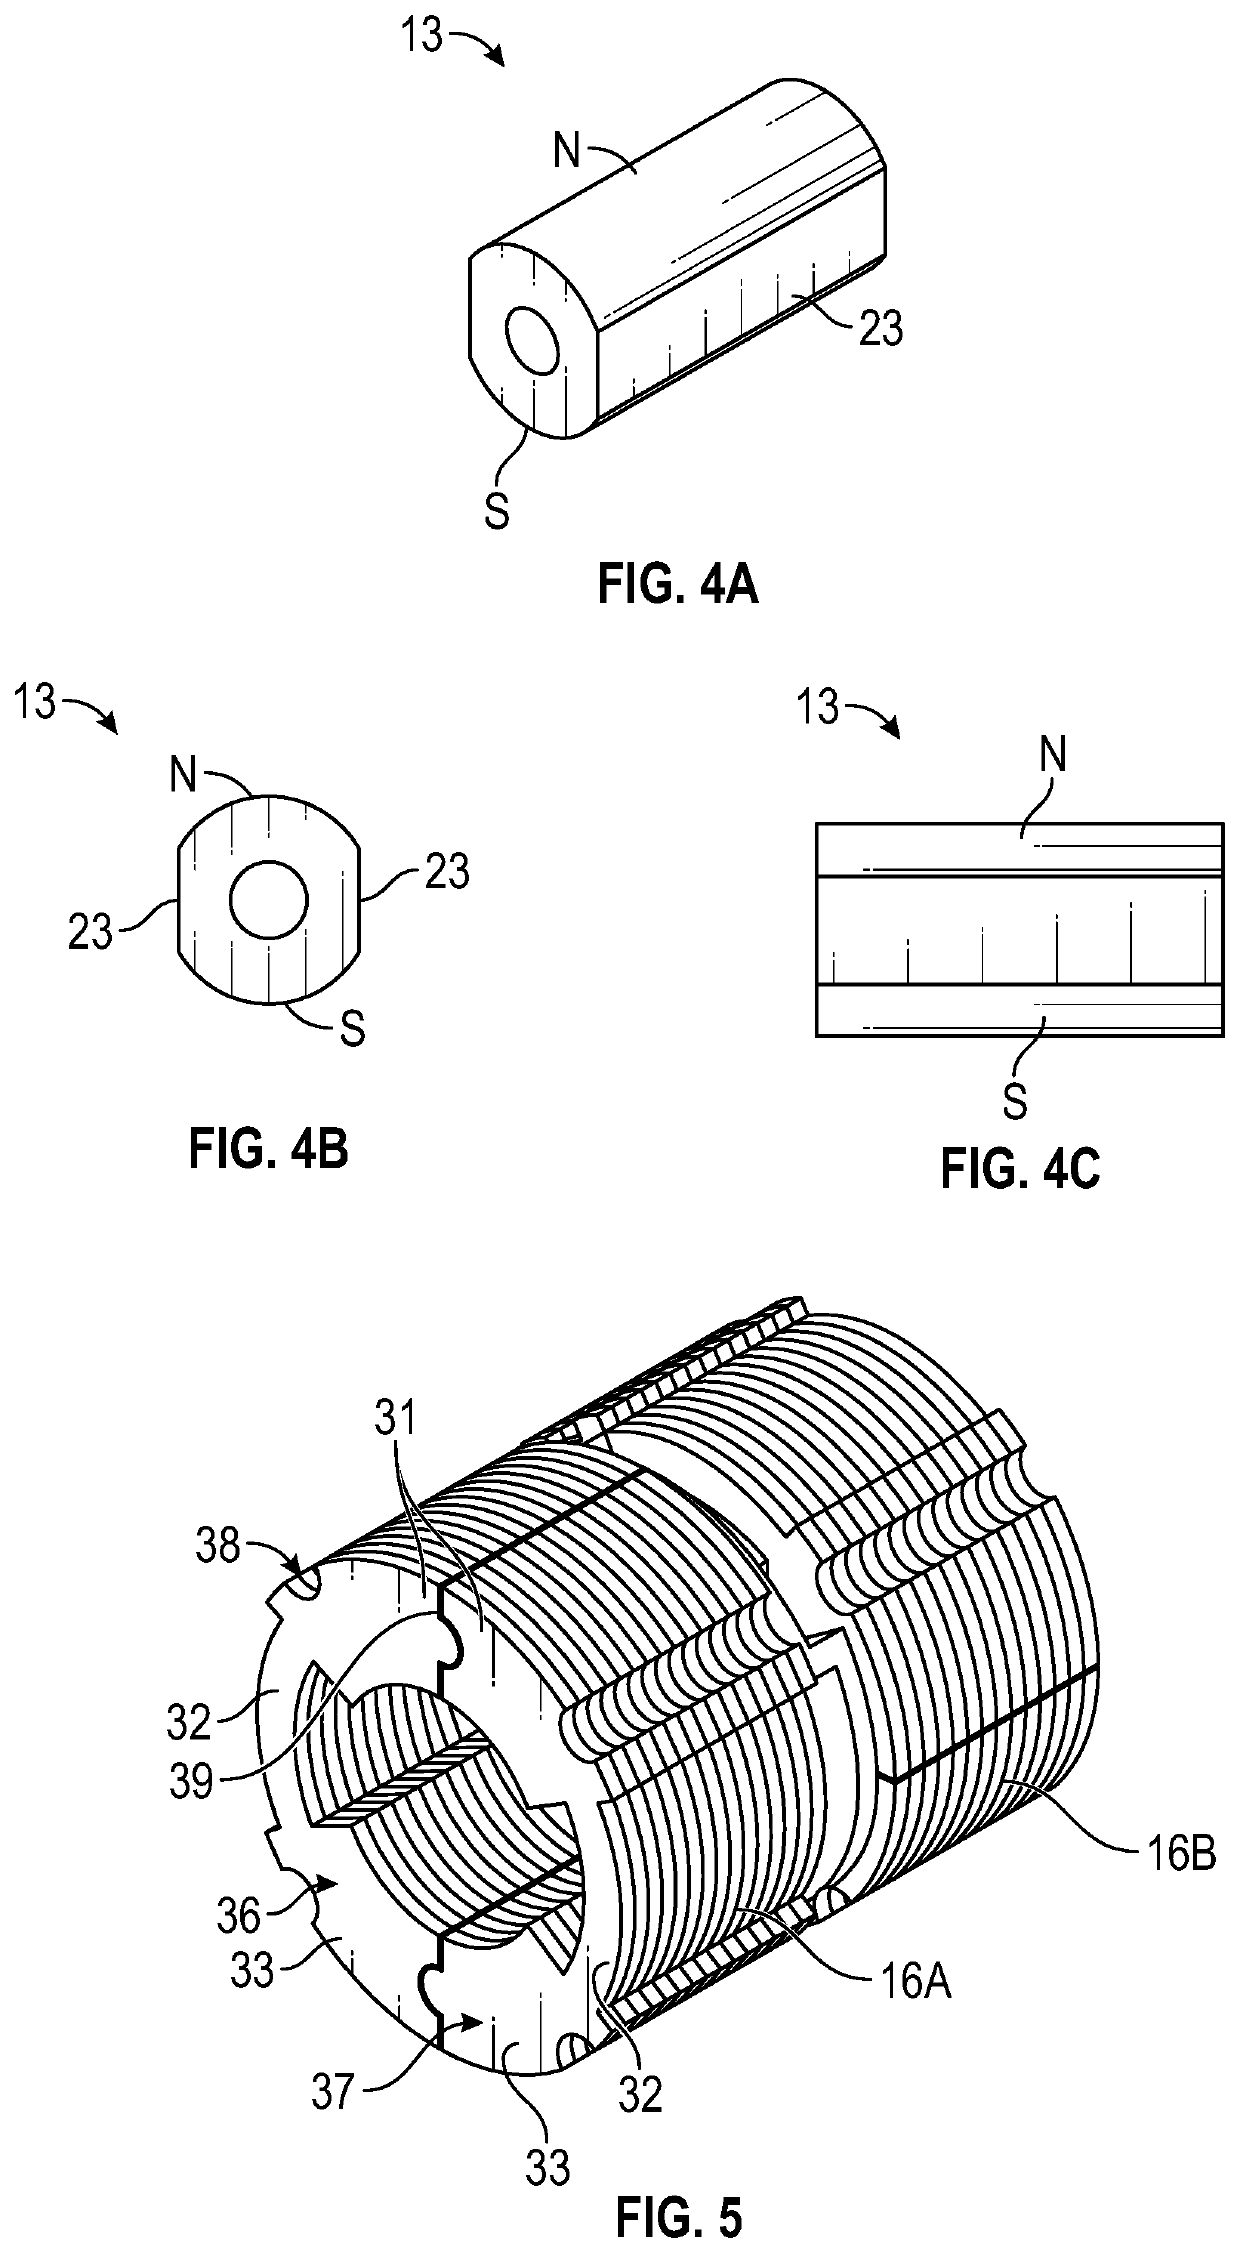 Miniature step motor with independent phase stators